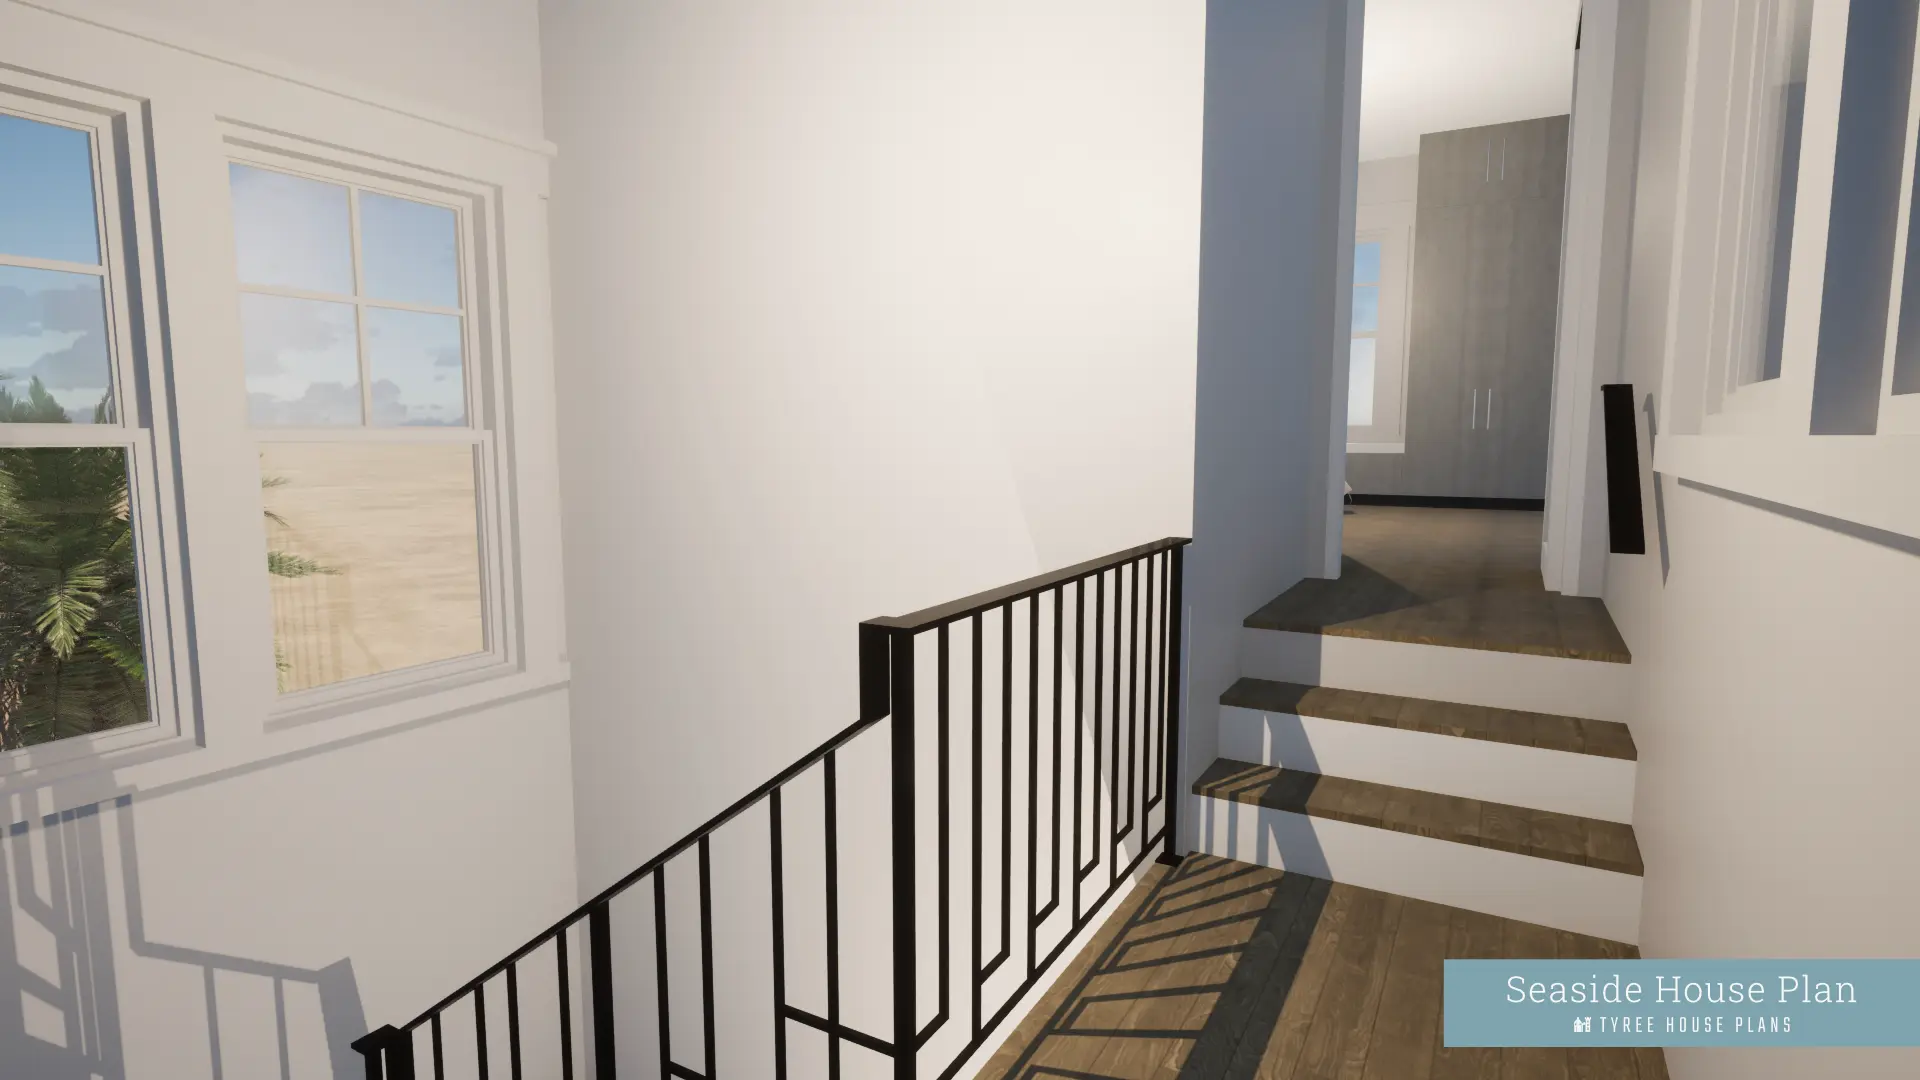 Stairwell 2 - Seaside House Plan by Tyree House Plans.